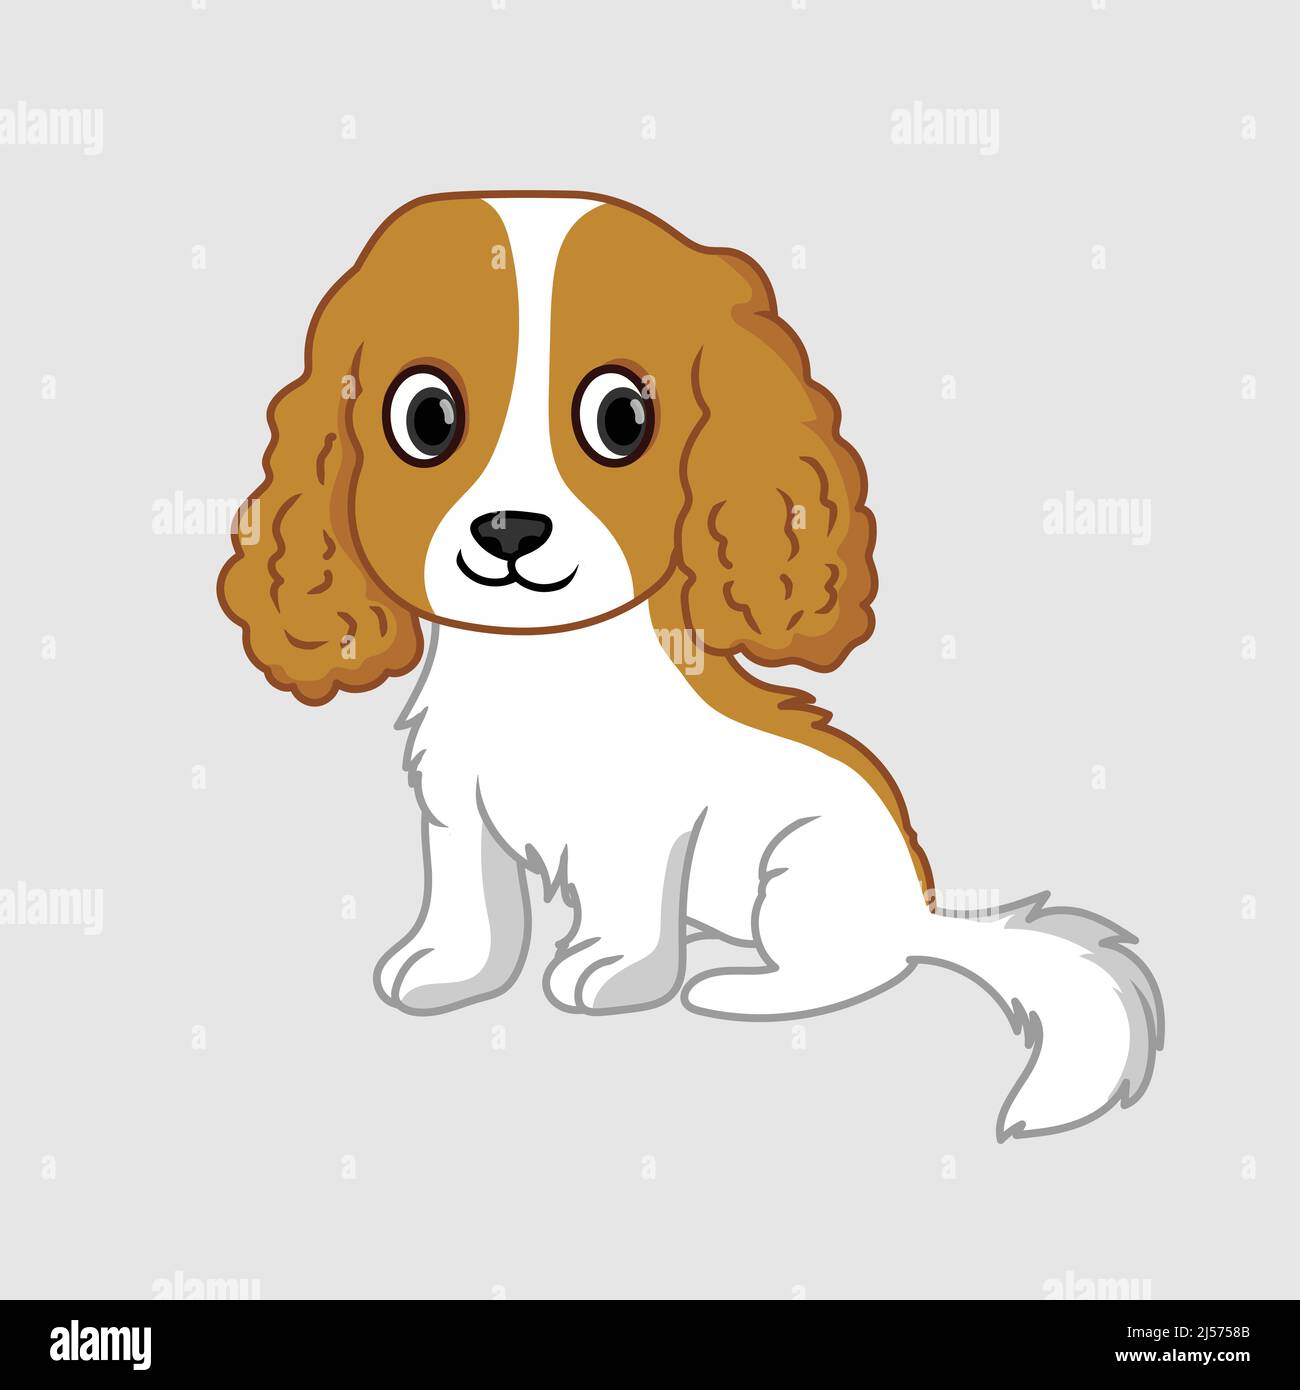 Spaniel vector Stock Photos and Images